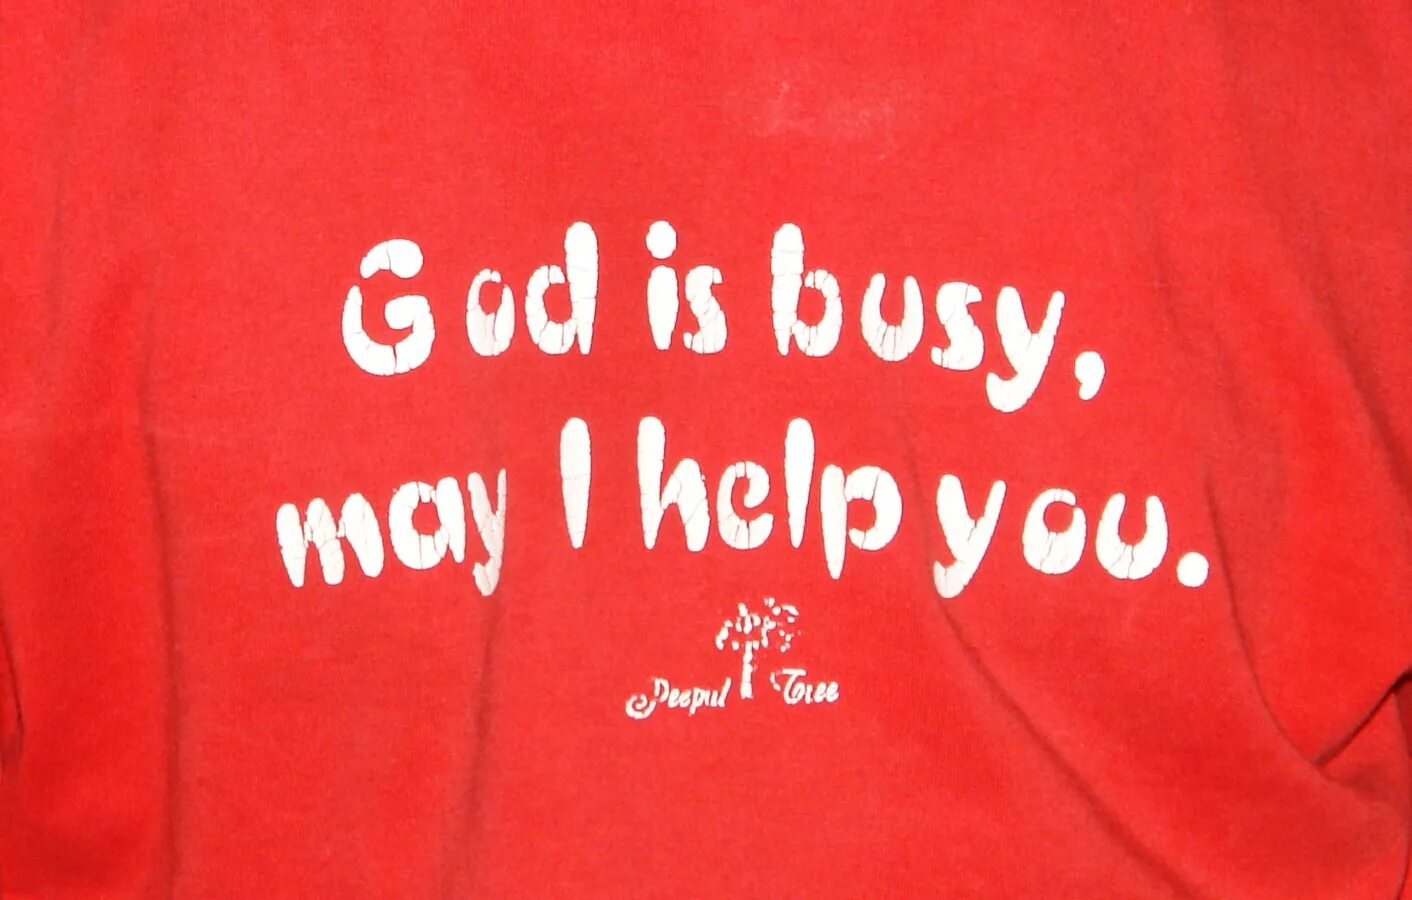 Can you help me out. God is busy can i help you плакат. How May i help you. God is busy can i help you футболка. Куртка God is busy can i help you.